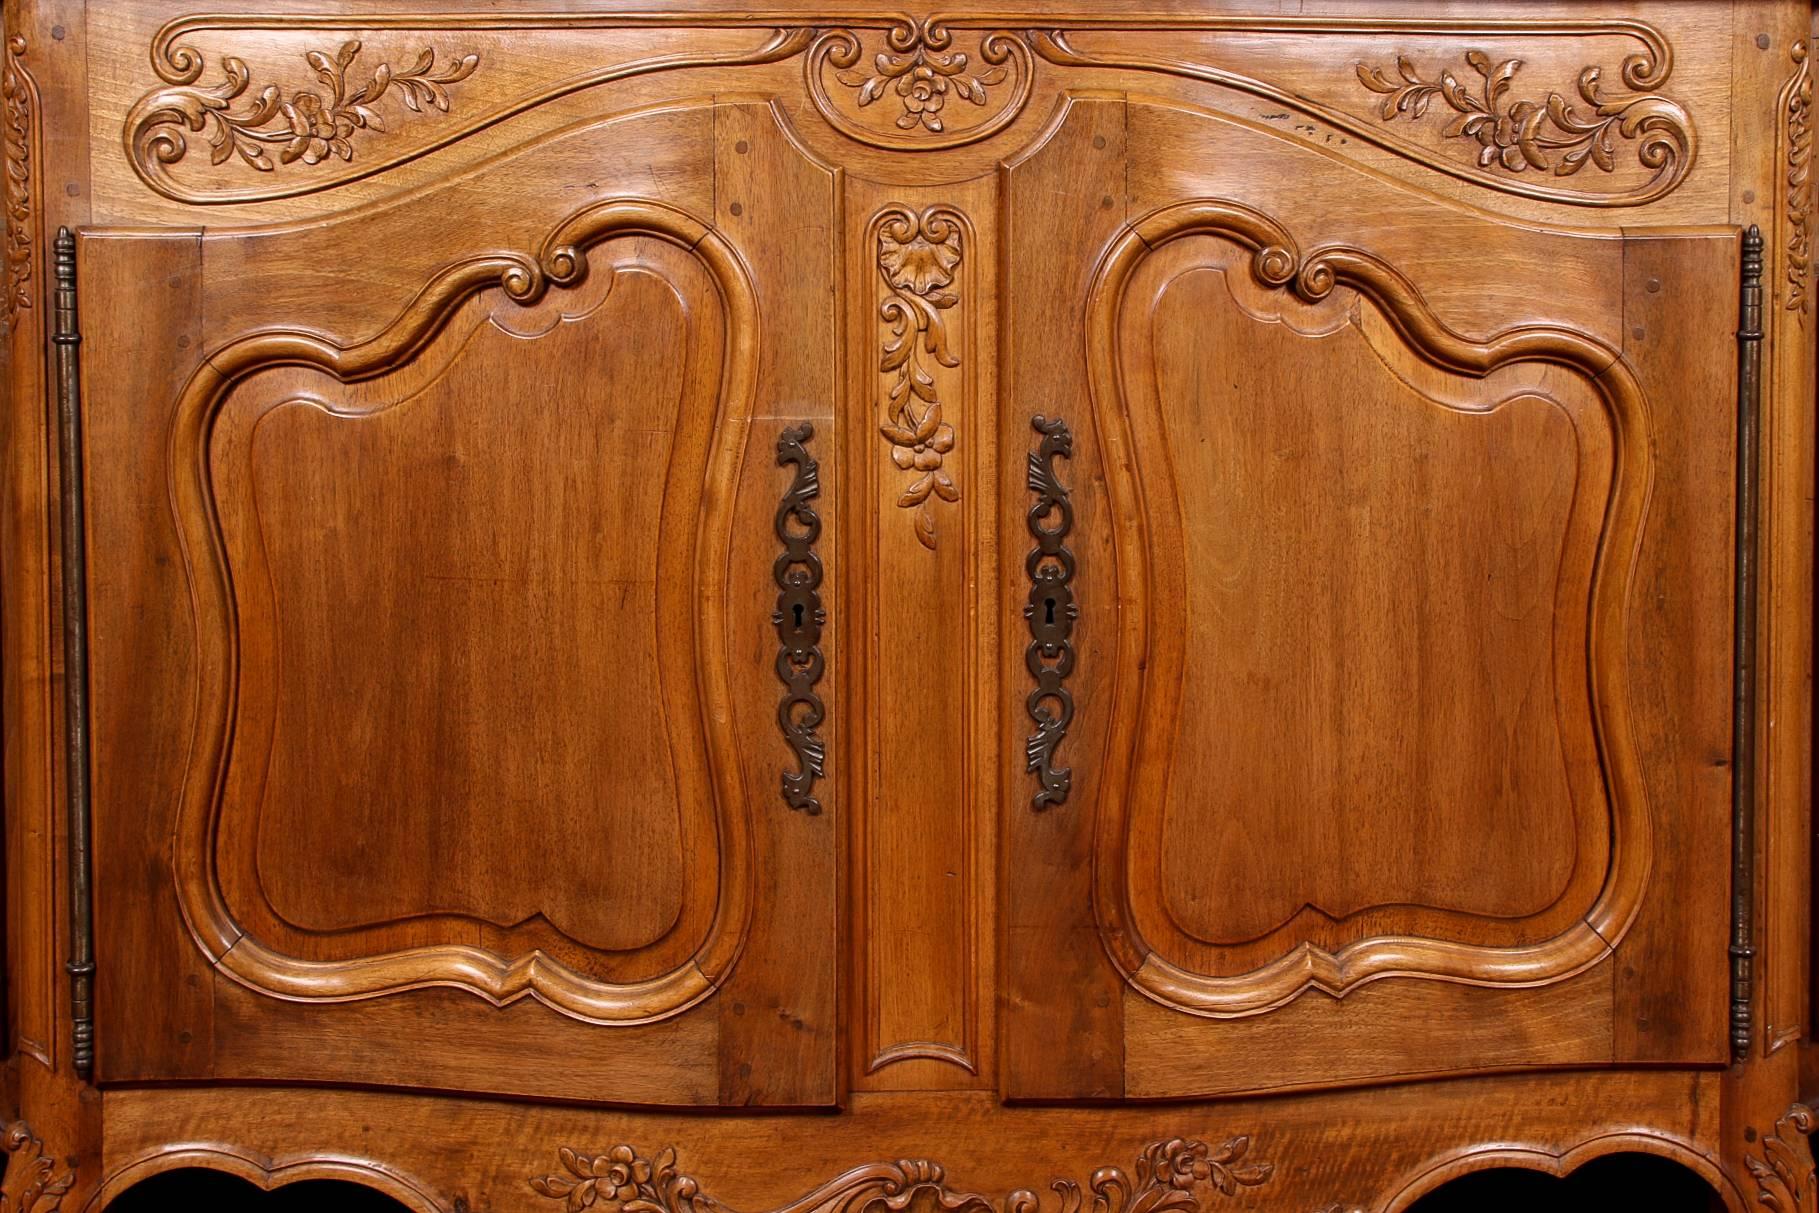 A large Classic French Enfilade with strong carving, great size and lots of storage space. With an elaborately carved shaped case with foliate scrolled decoration, recessed sides with doors and escutcheons and a centre double door cabinet with